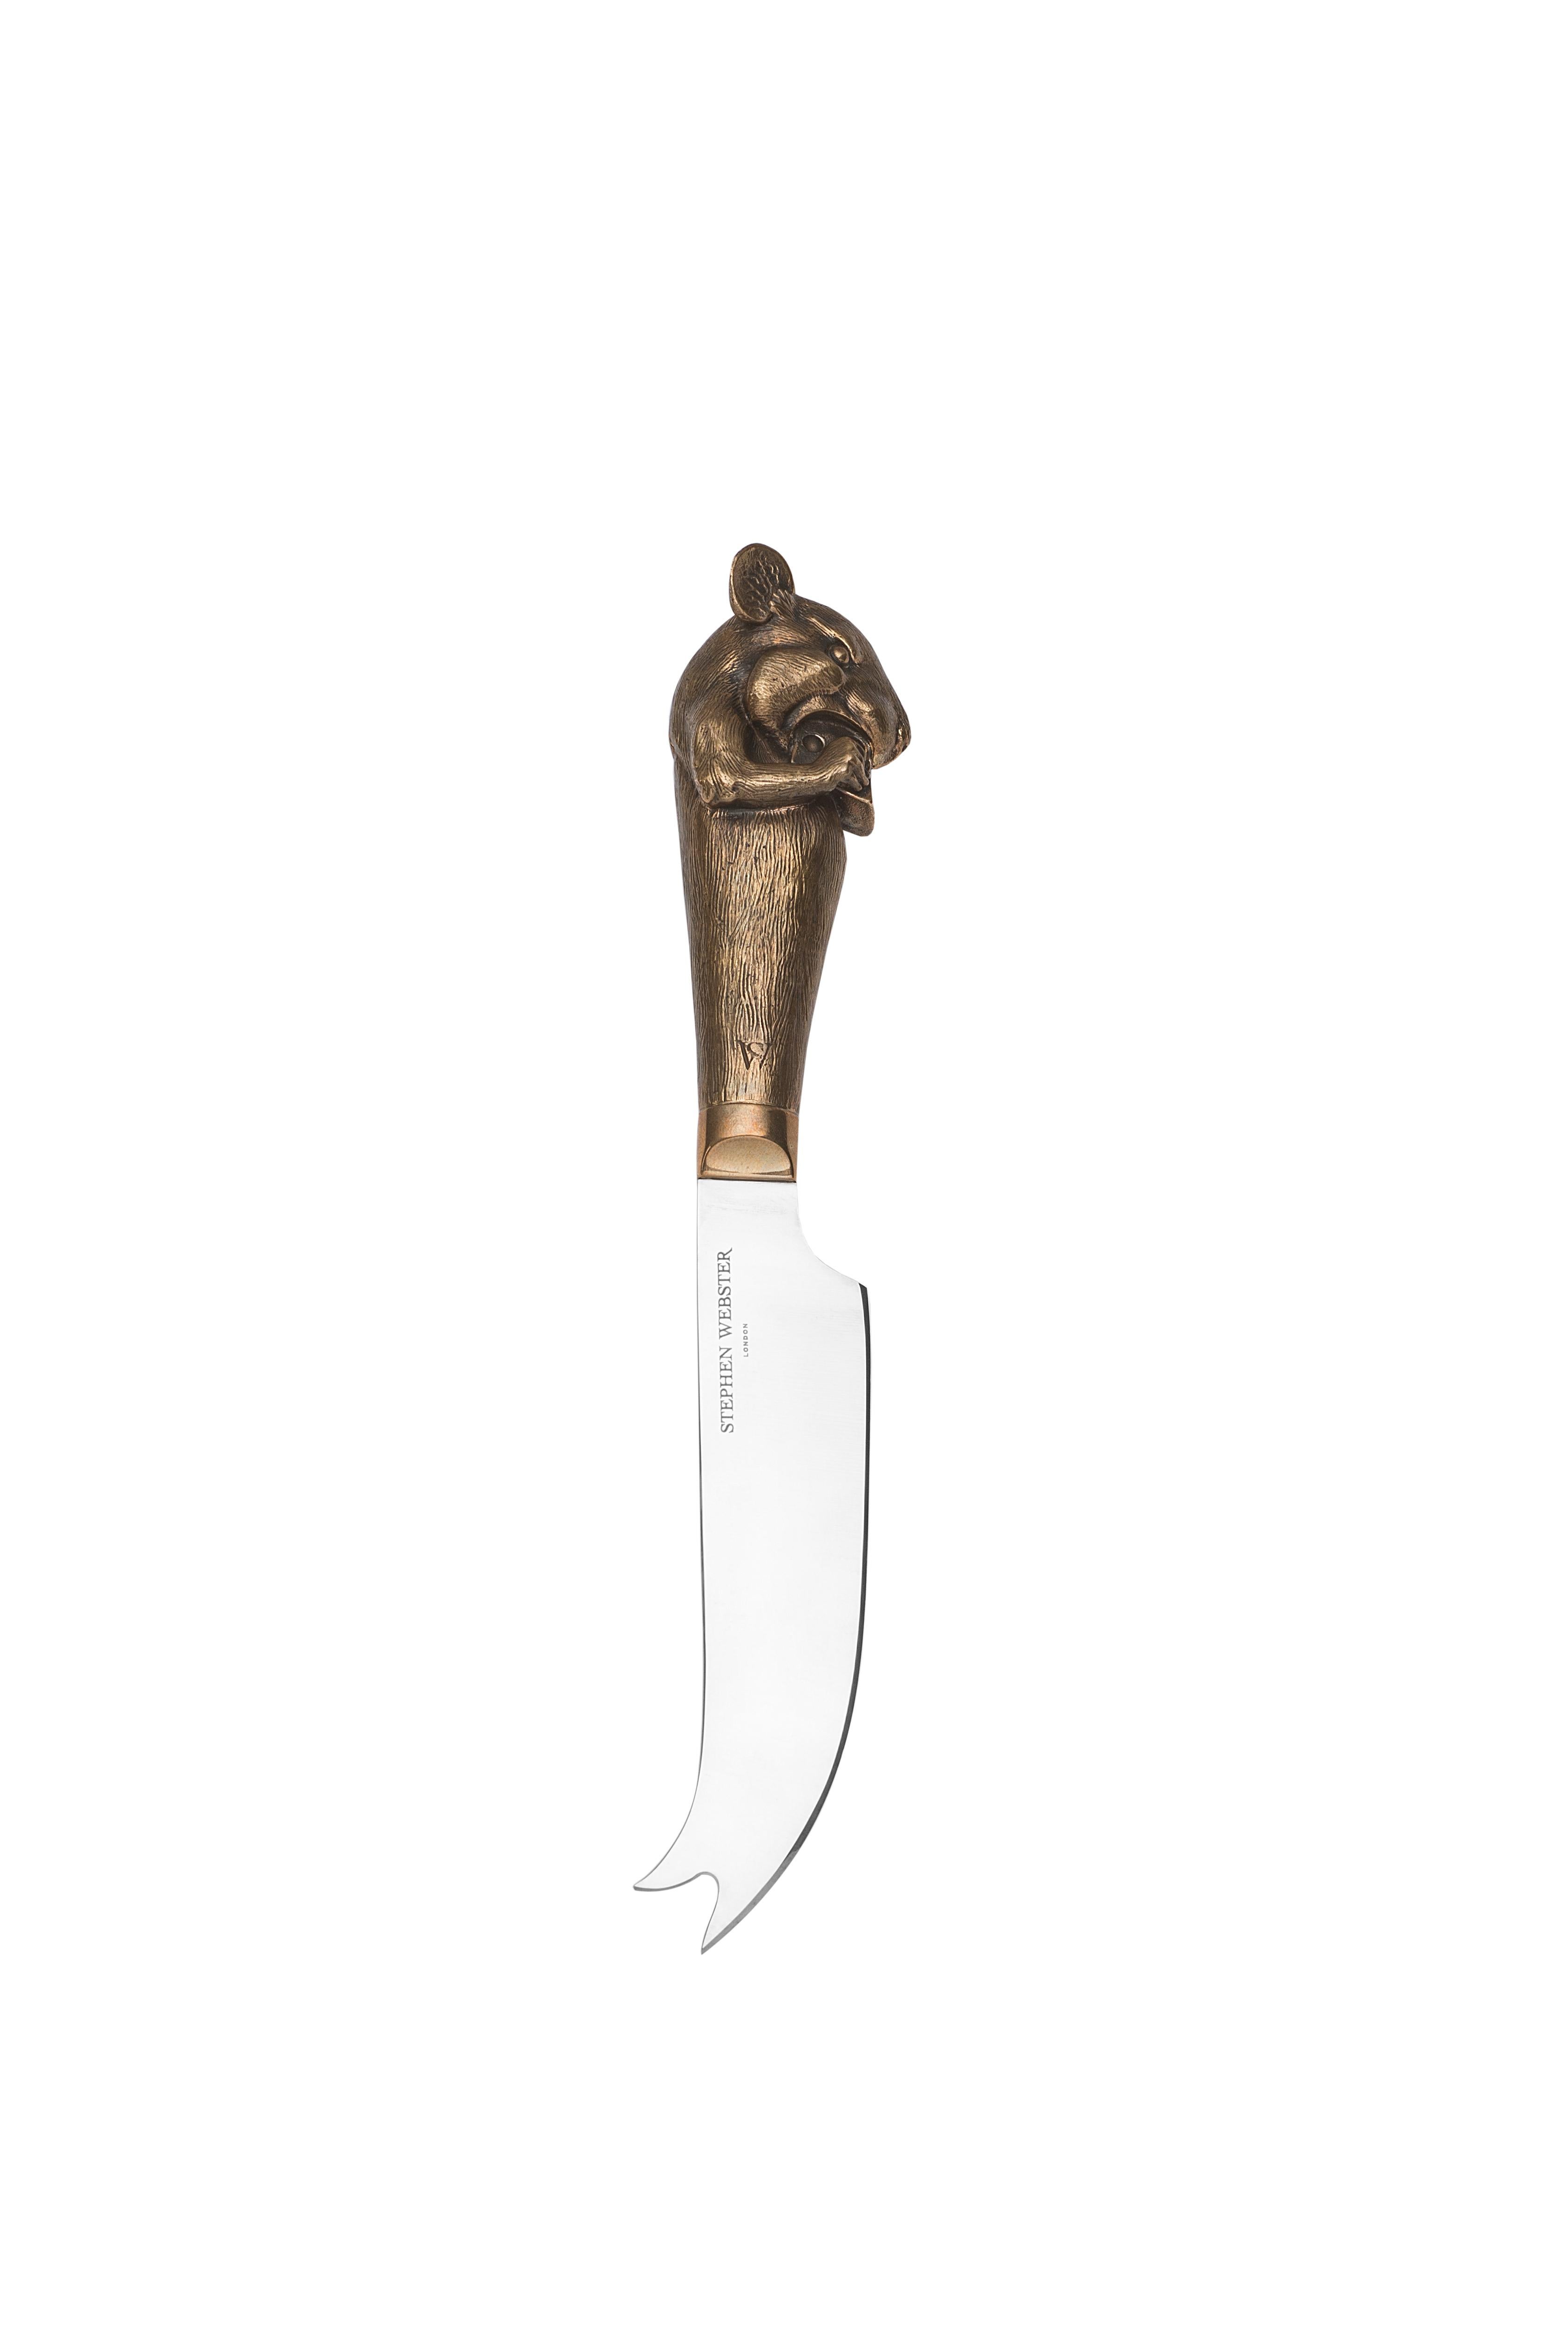 A single Bronze Beast Cheese Knife with folded steel blade and bronze handle featuring a Mouse.

Please enquire for your exclusive price if your delivery country is outside of the United Kingdom.

The luxury ‘Homeware’ collection has grown out of